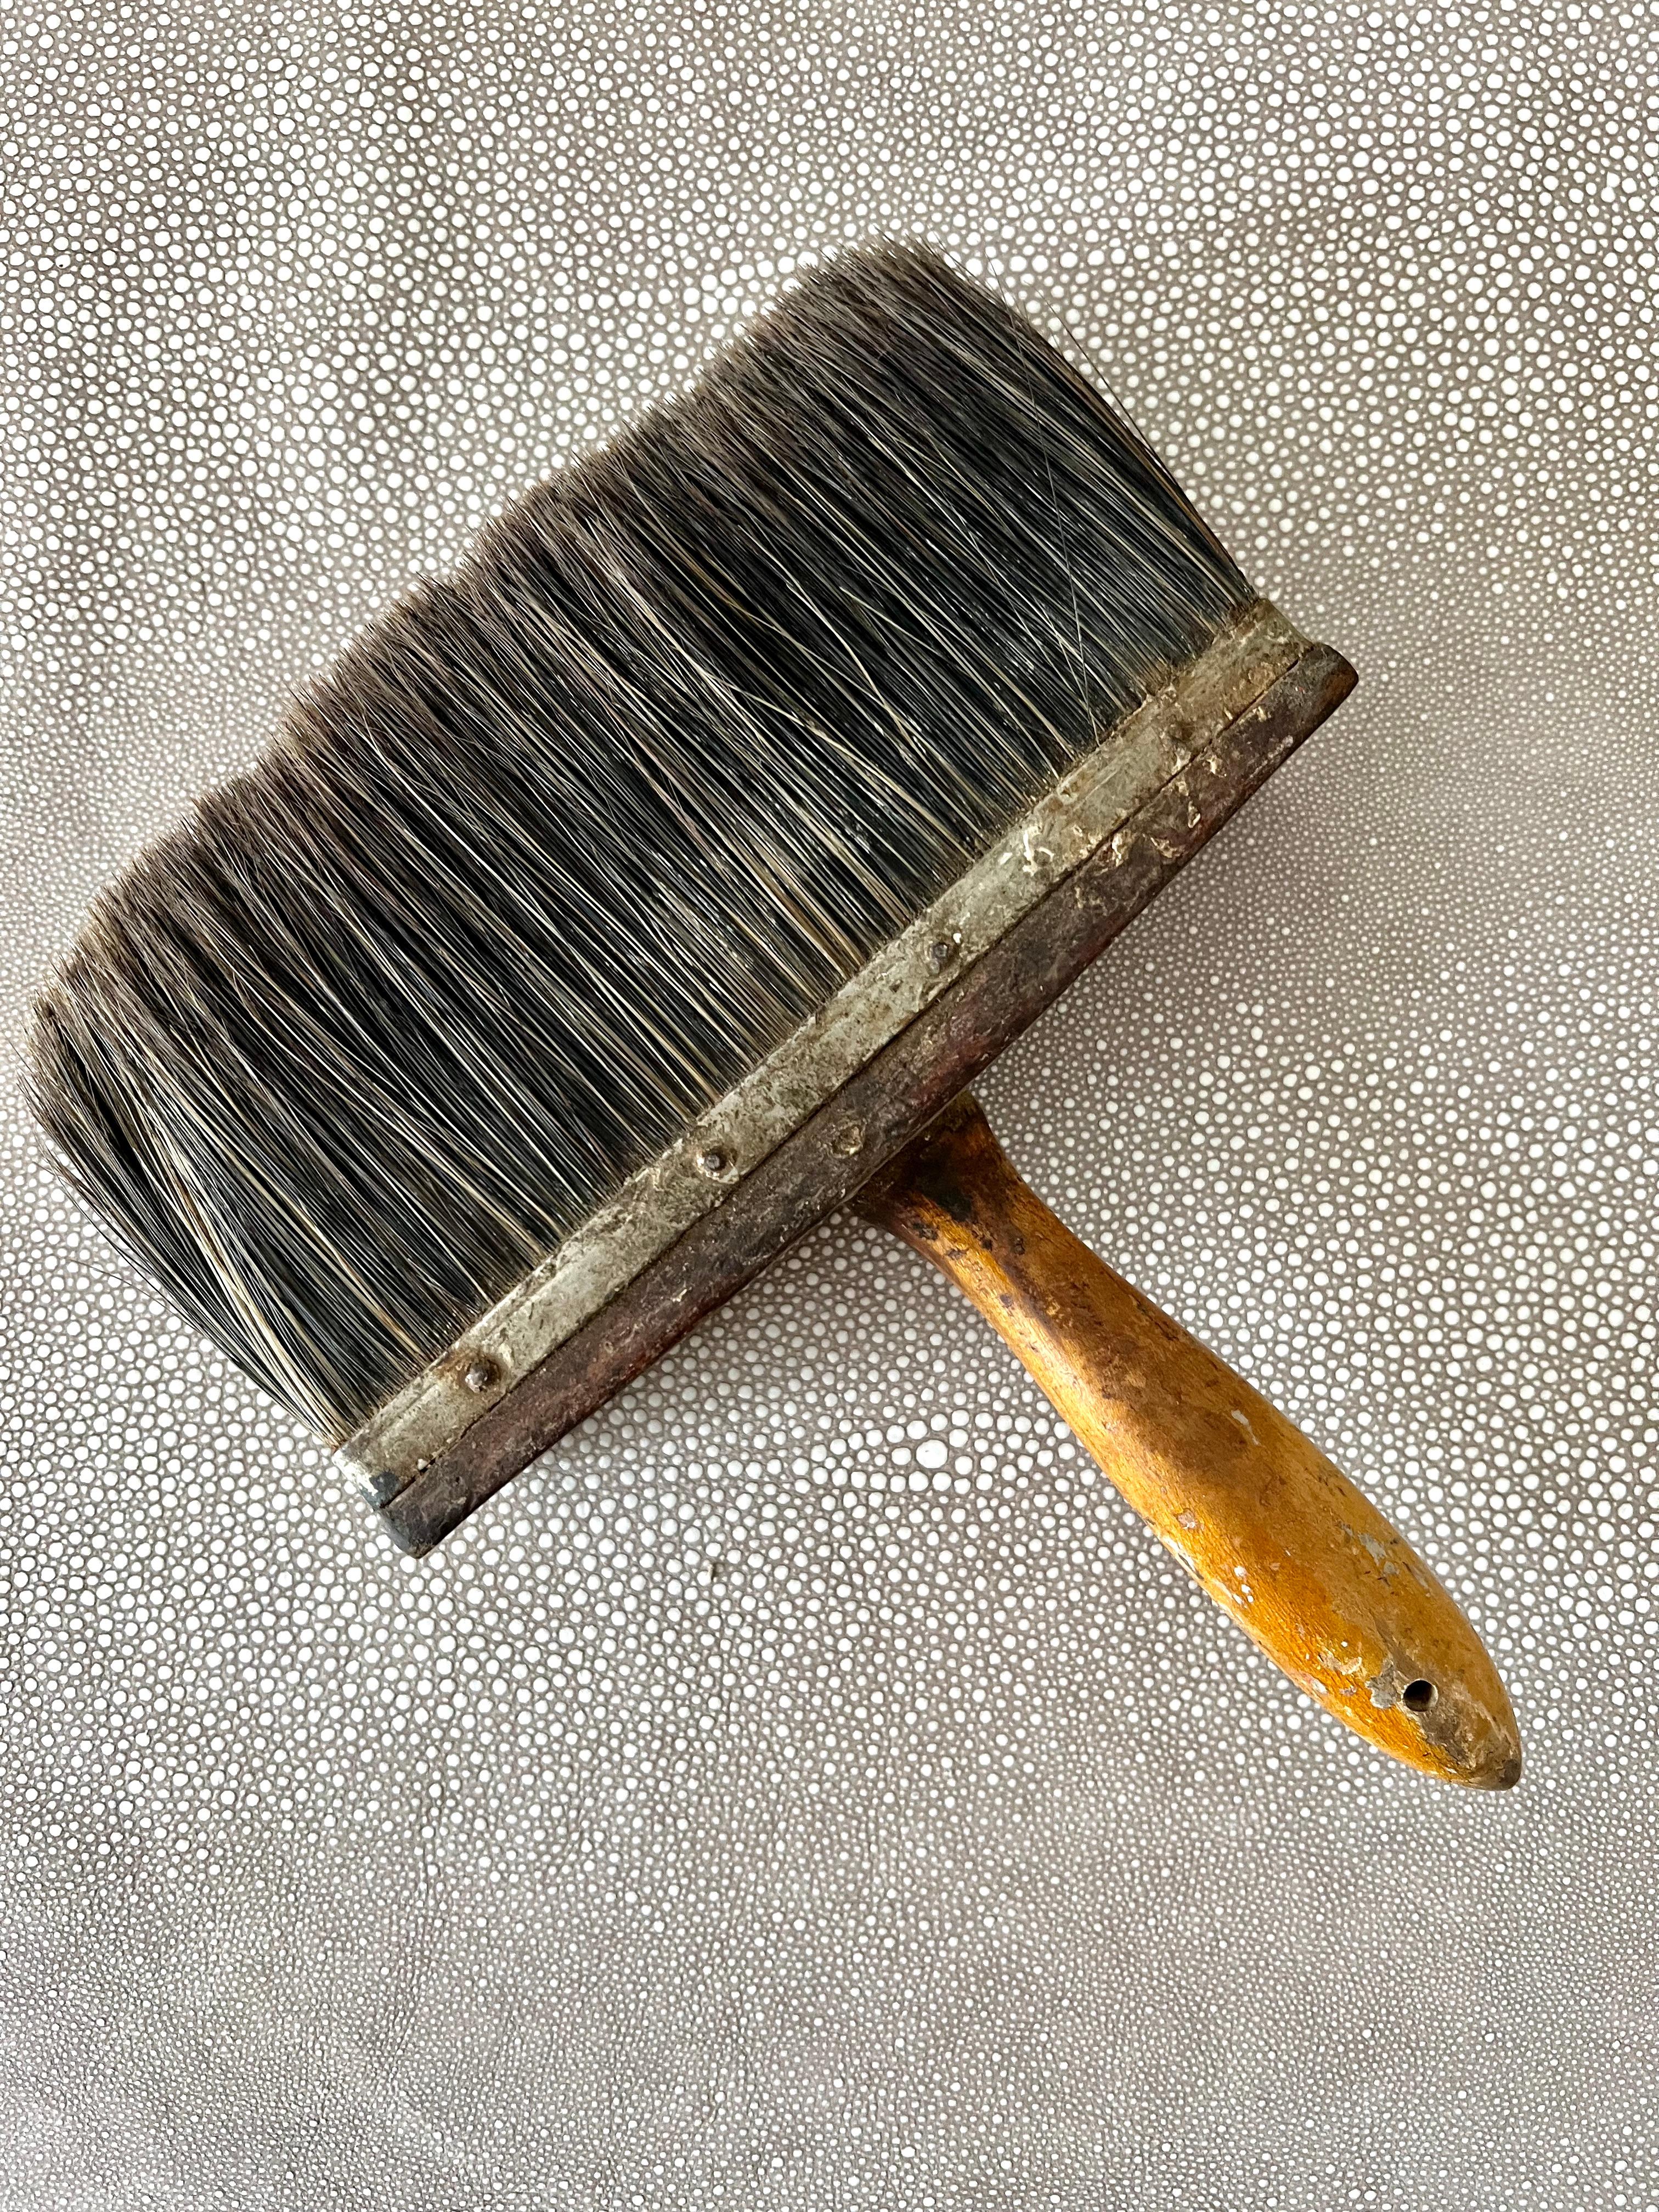 A vintage paint brush - patinated and full of life and stories... a wonderful decorative piece for any room - organic and textured. The wood is thick and substantial - with a band of metal and finishing nails to hold in the horse hair bristles...